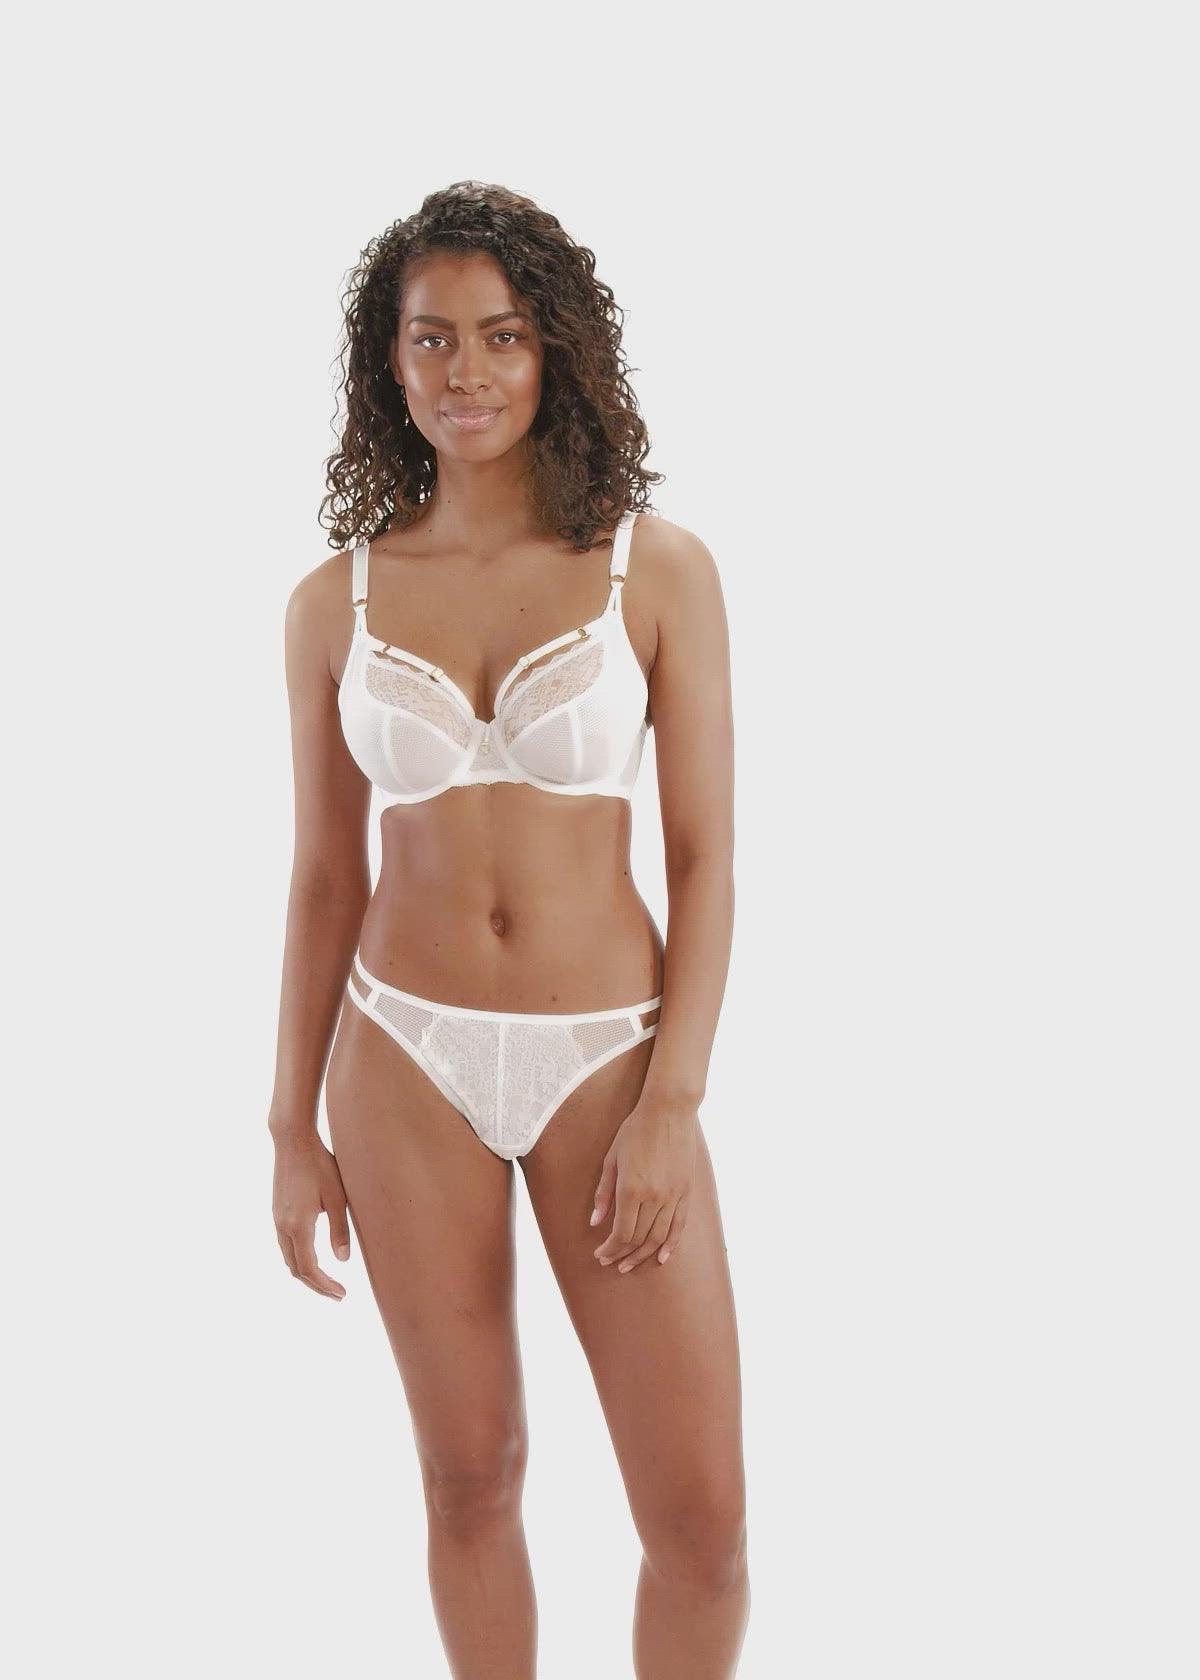 Vanilla Sweet - Lace Strapless Bra with Panties, YesStyle